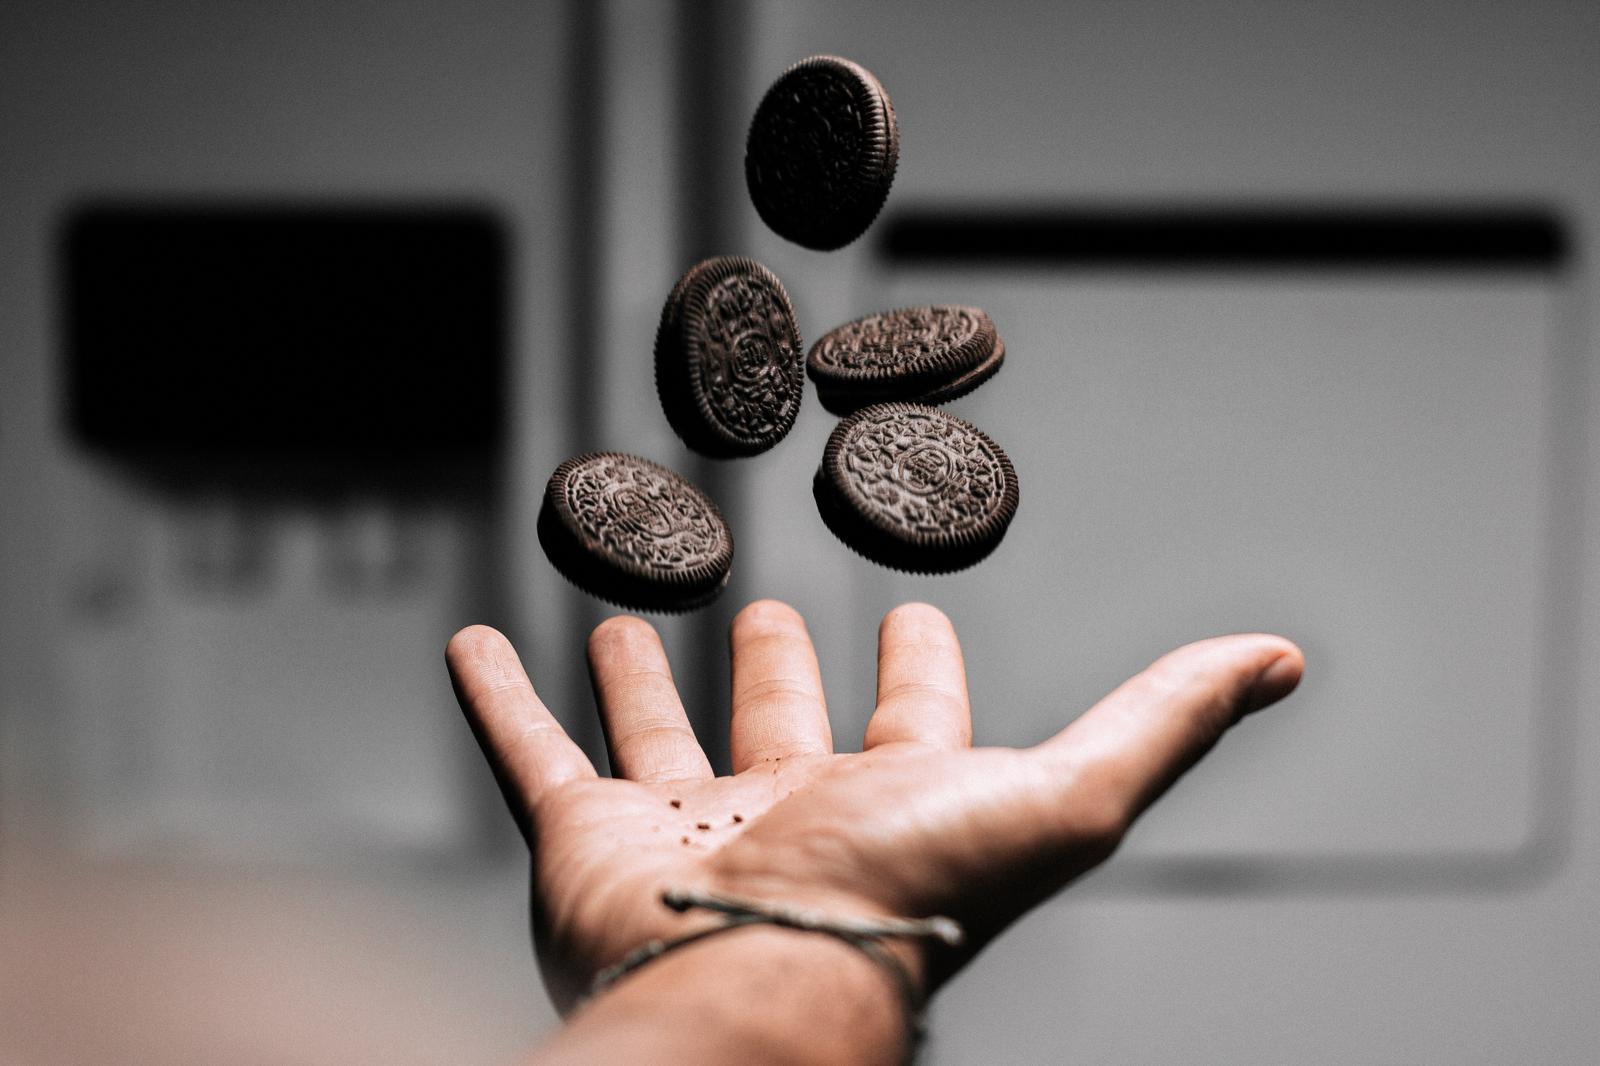 Choose Between This or That to Find Out If You’re a Glass-Half-Full or Glass-Half-Empty Person Oreo cookies